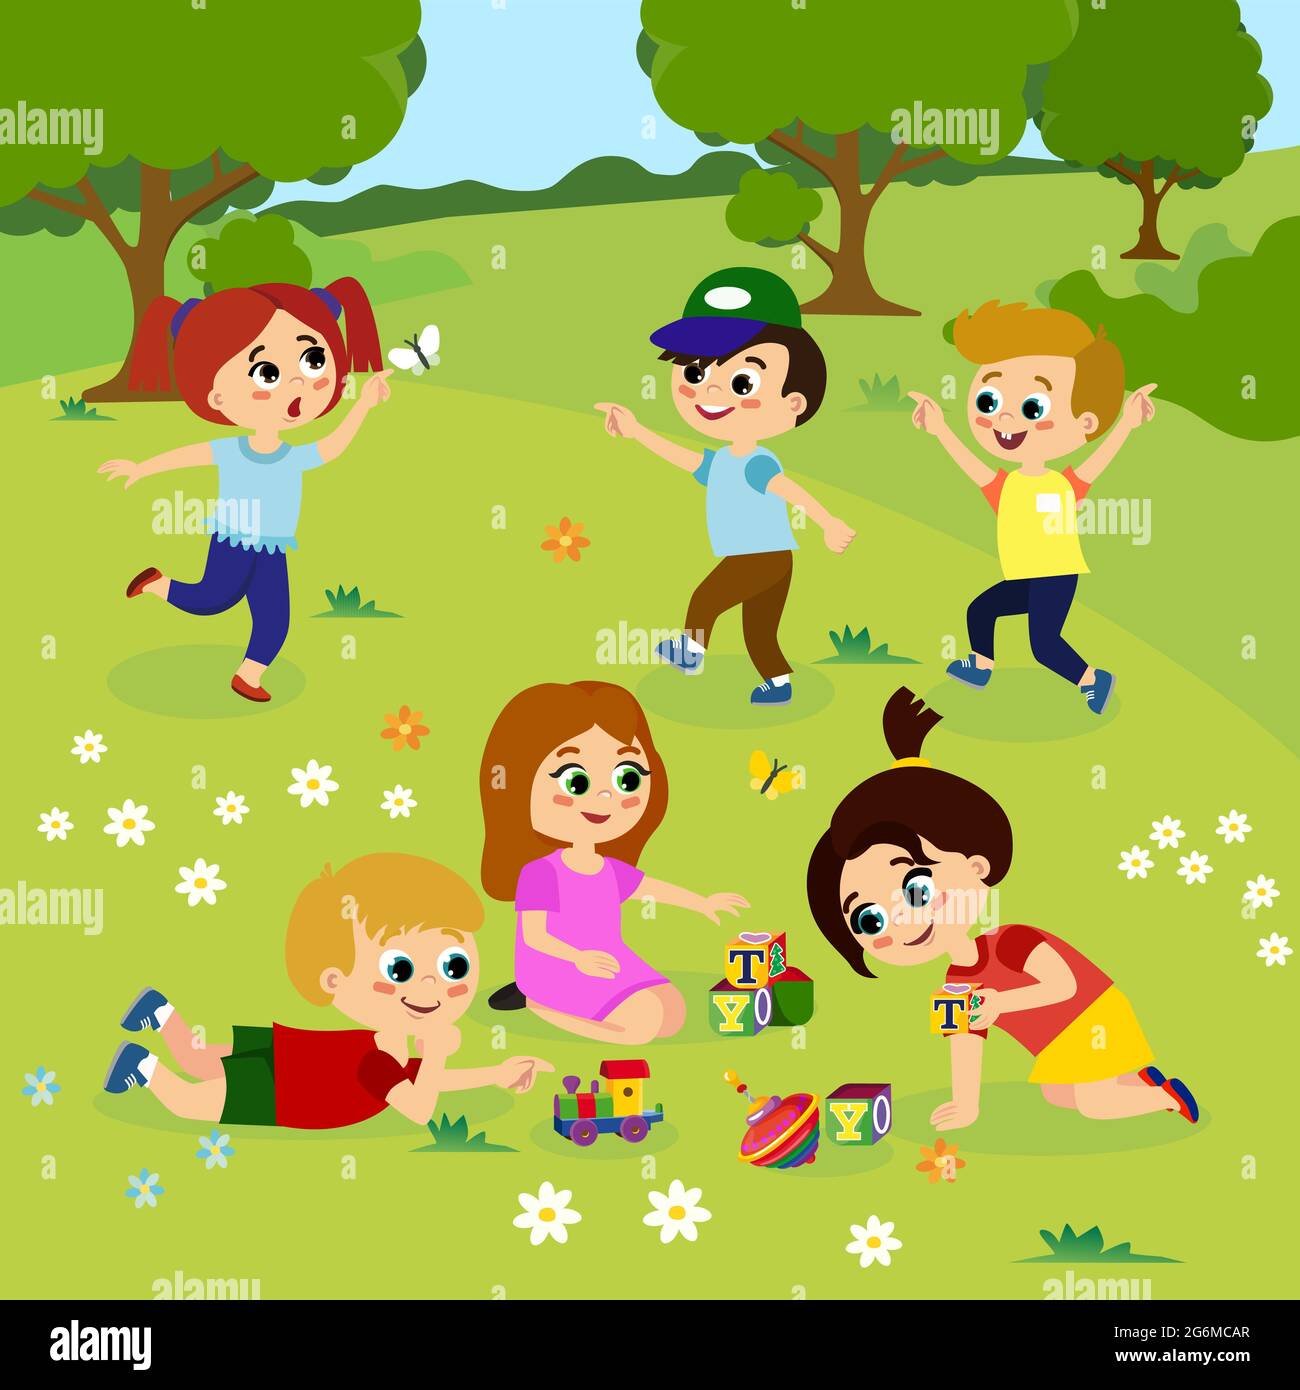 Vector illustration of kids playing outside on green grass with flowers, trees. Happy children playing on the yard with toys in cartoon flat style. Stock Vector